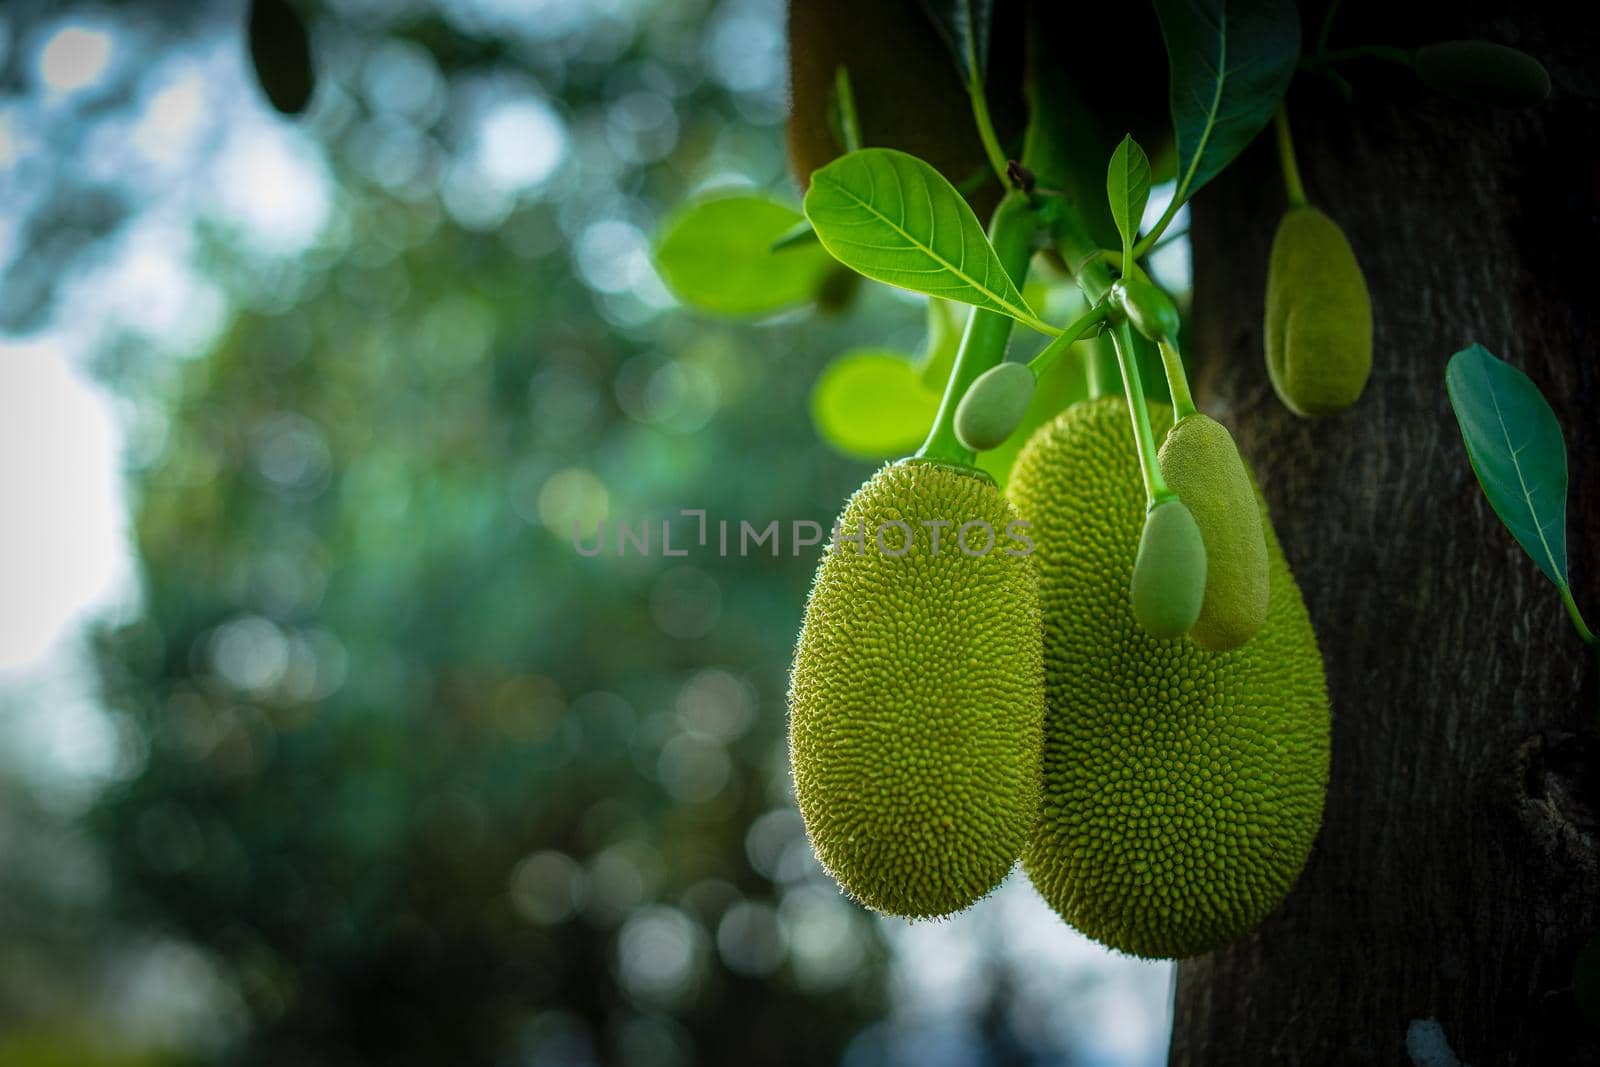 Jack fruits hanging on trees in a garden